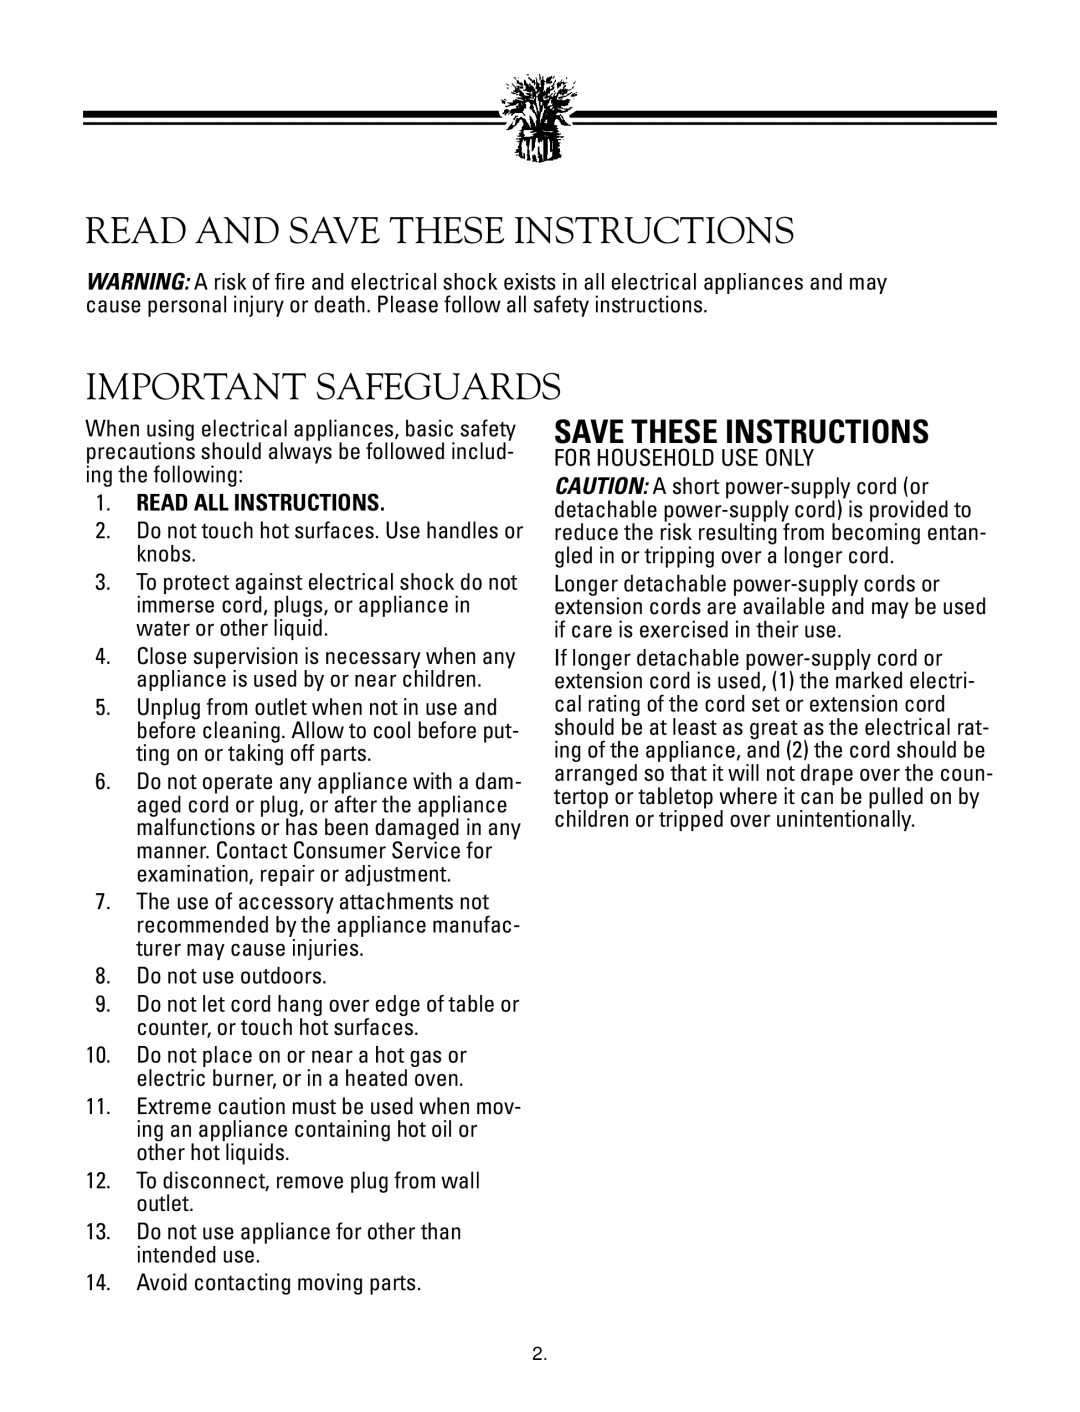 Breadman TR888 instruction manual Read And Save These Instructions, Important Safeguards 